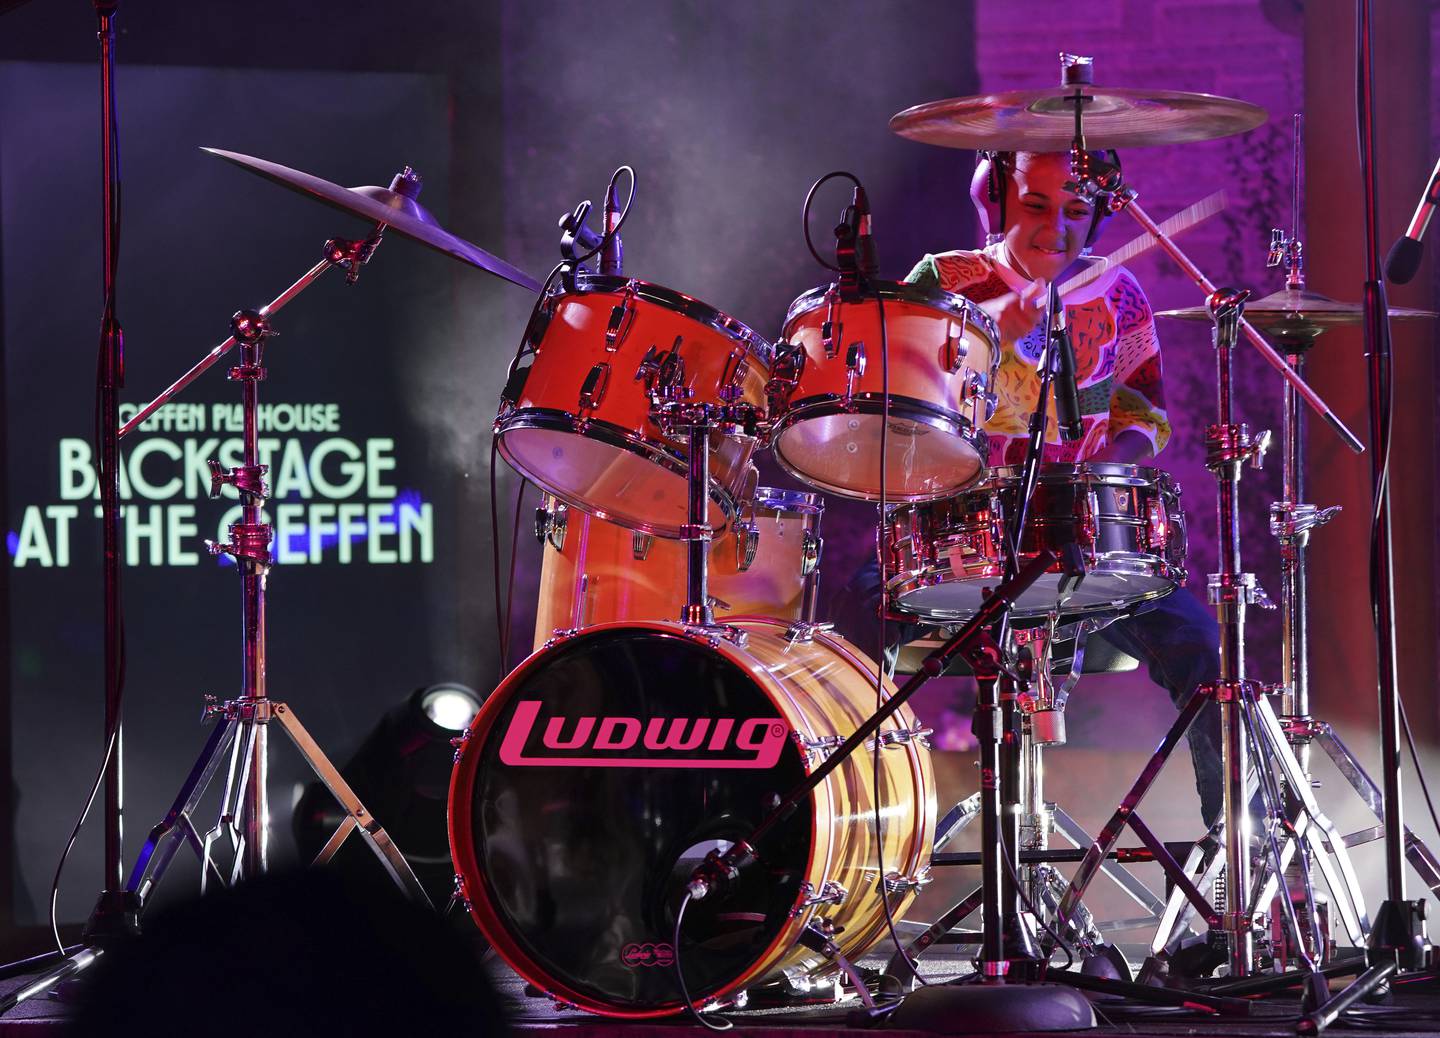 Drumming sensation Nandi Bushell has fans including Lenny Kravitz, the Arctic Monkeys and Metallica, and has built an Instagram page that is like a rock and roll hall of fame. AP